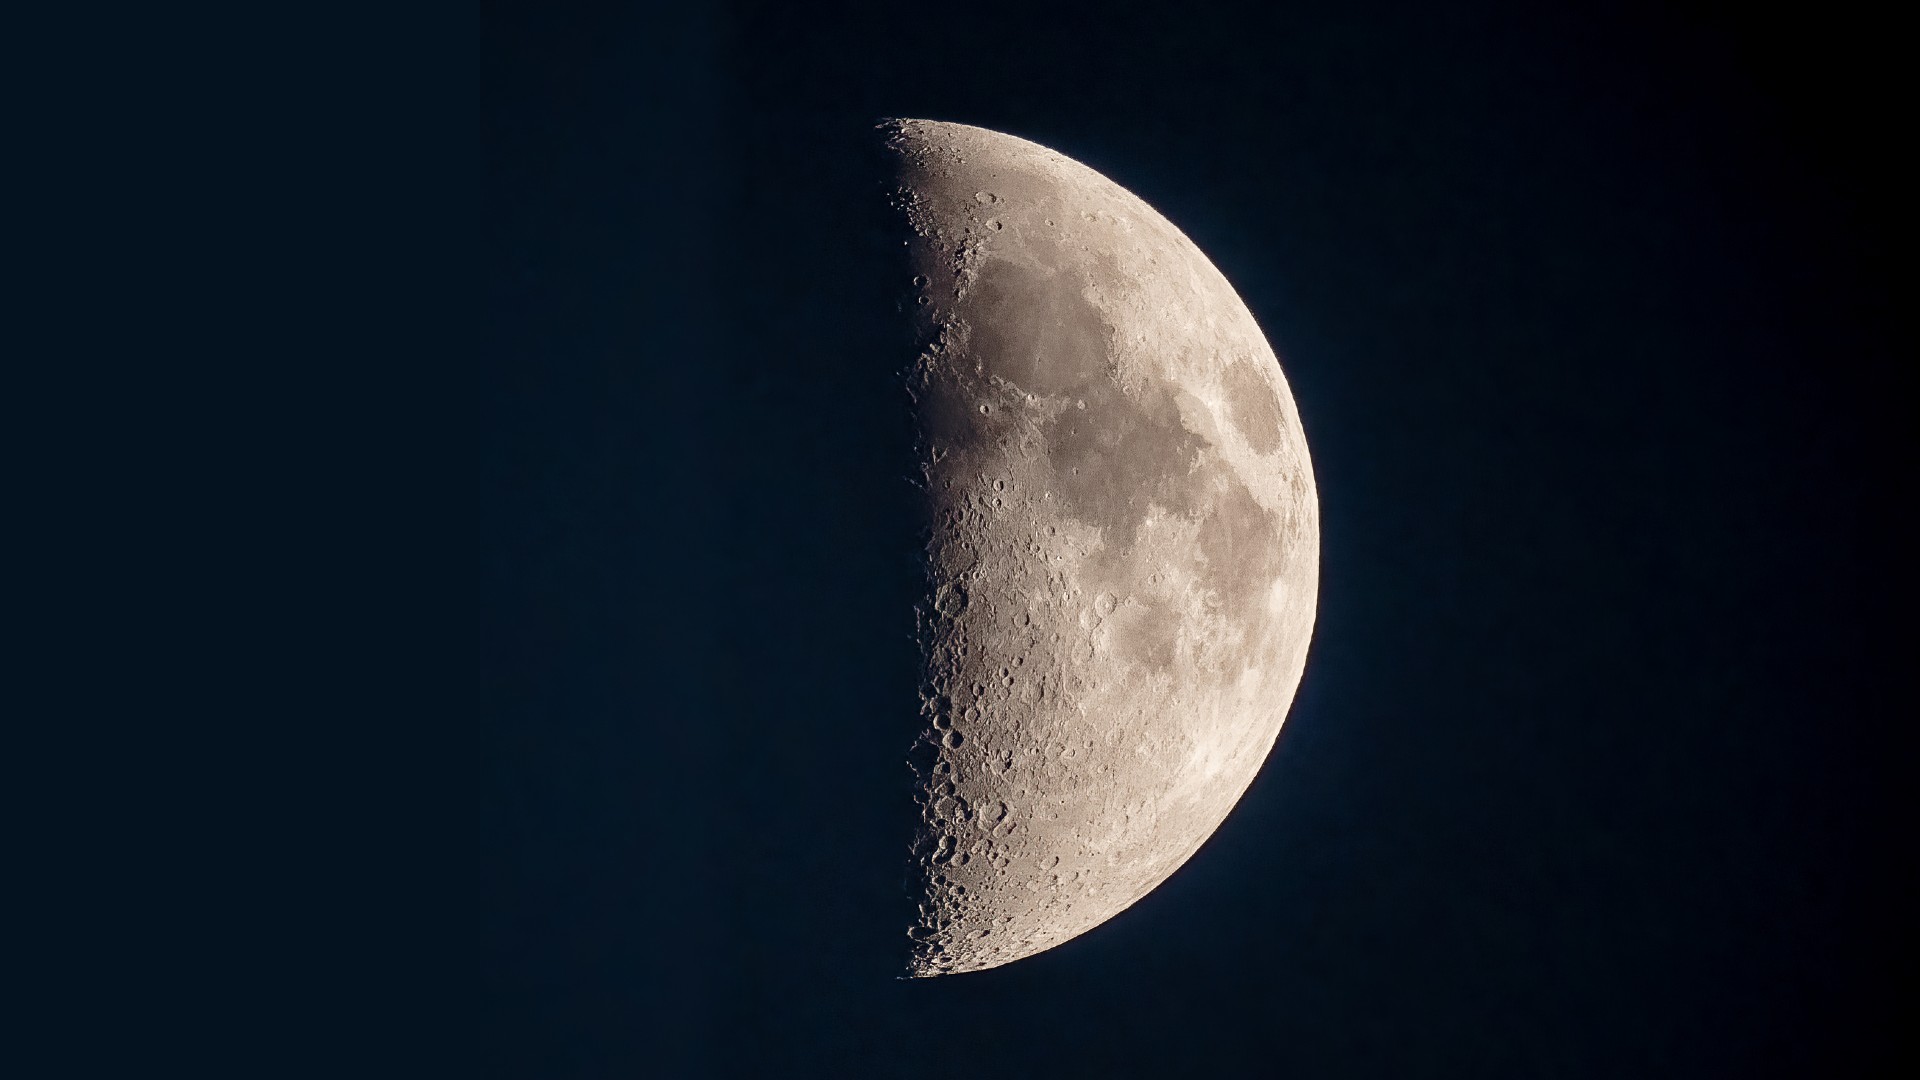 It’s ‘International Observe the Moon Night’ tonight. Here’s how to participate Space